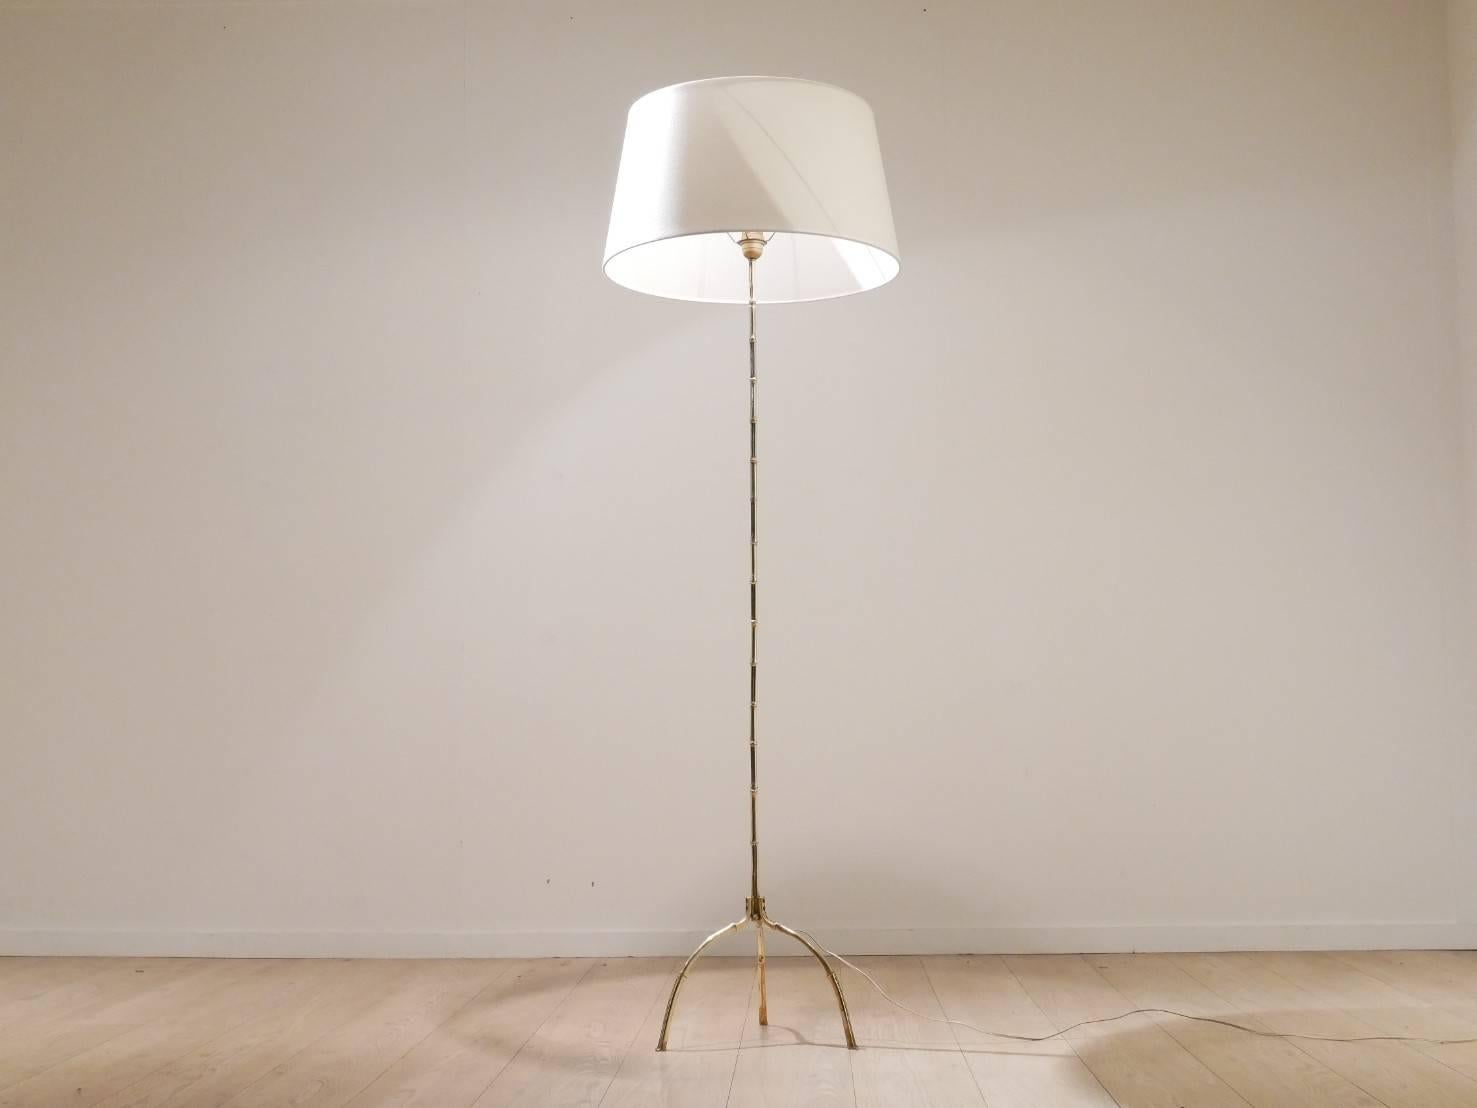 Midcentury French floor lamp from Maison Baguès, faux bamboo patterned brass stem on tripod feet. New off-white round shaped textile diffuser.